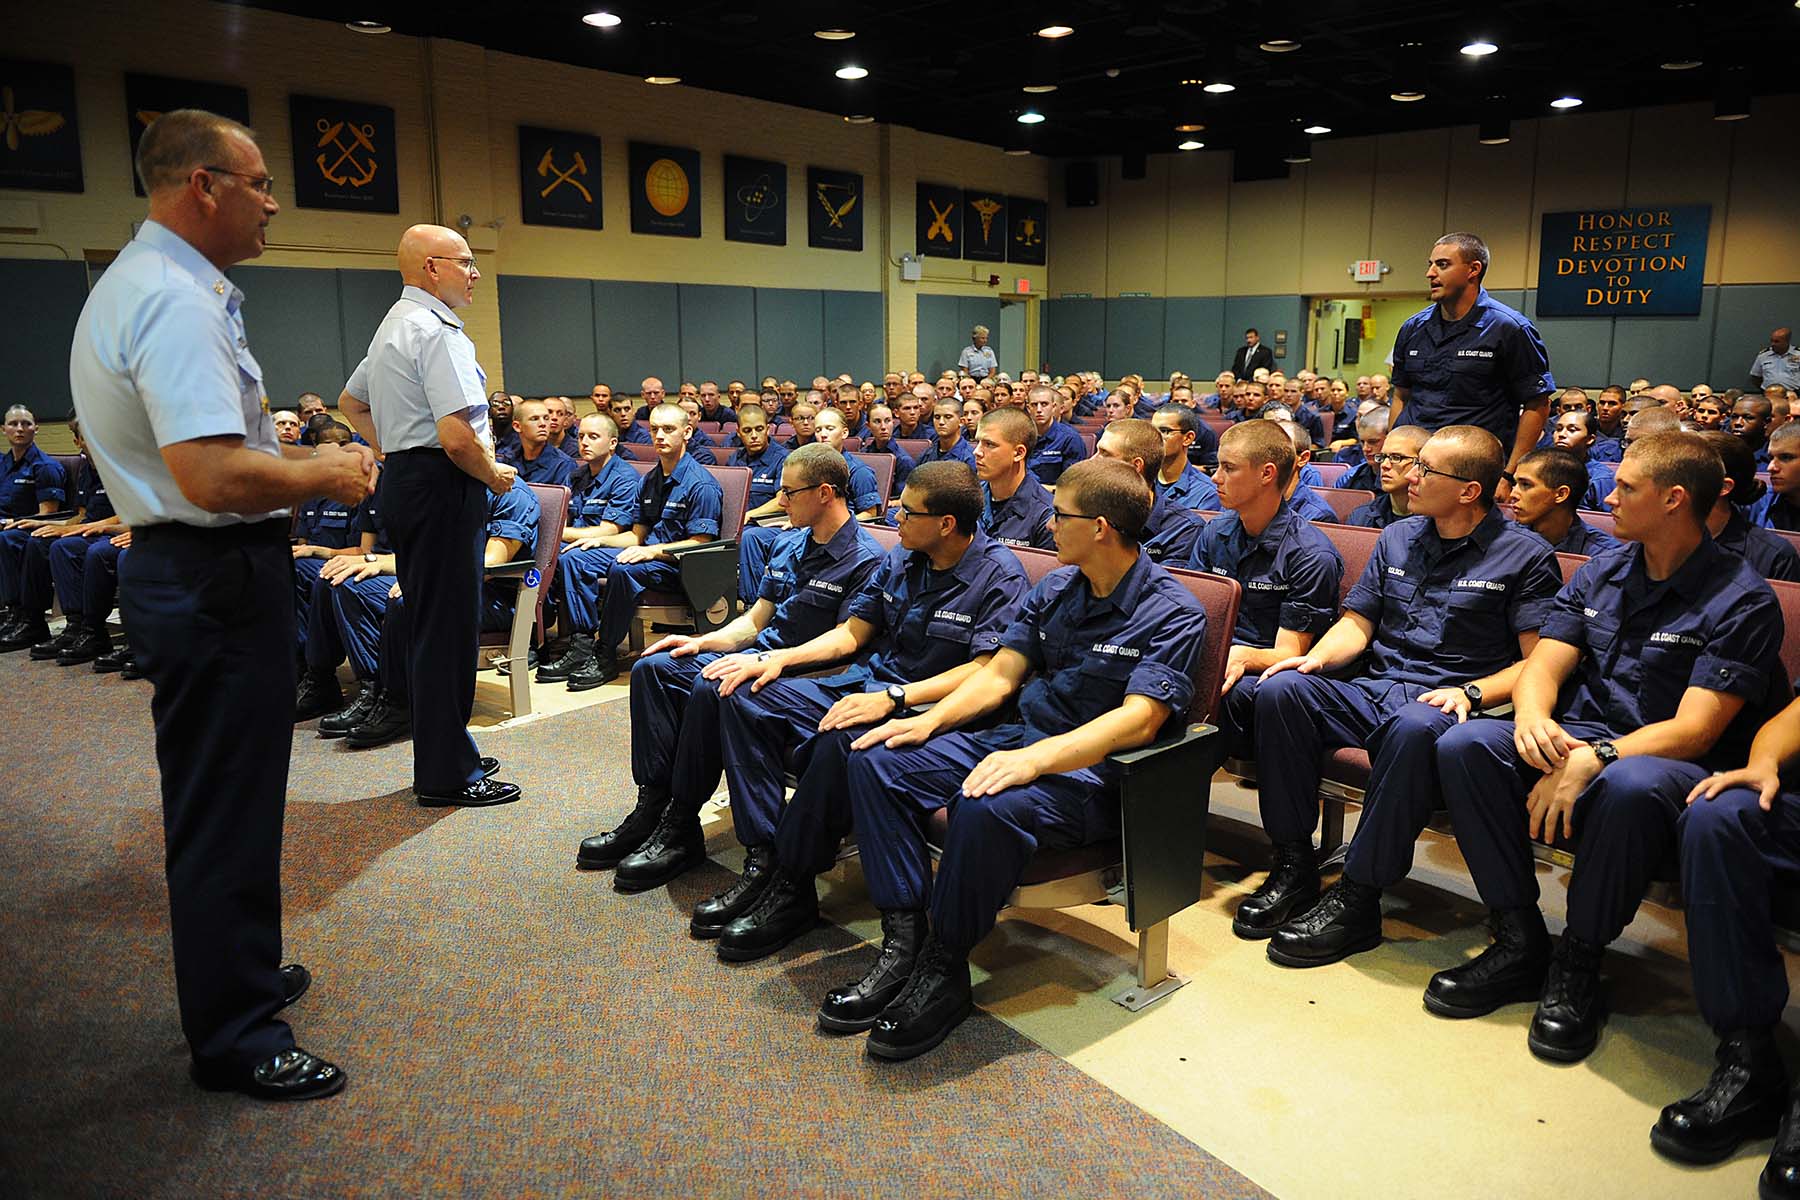 Coast Guard Boot Camp Timeline at a Glance